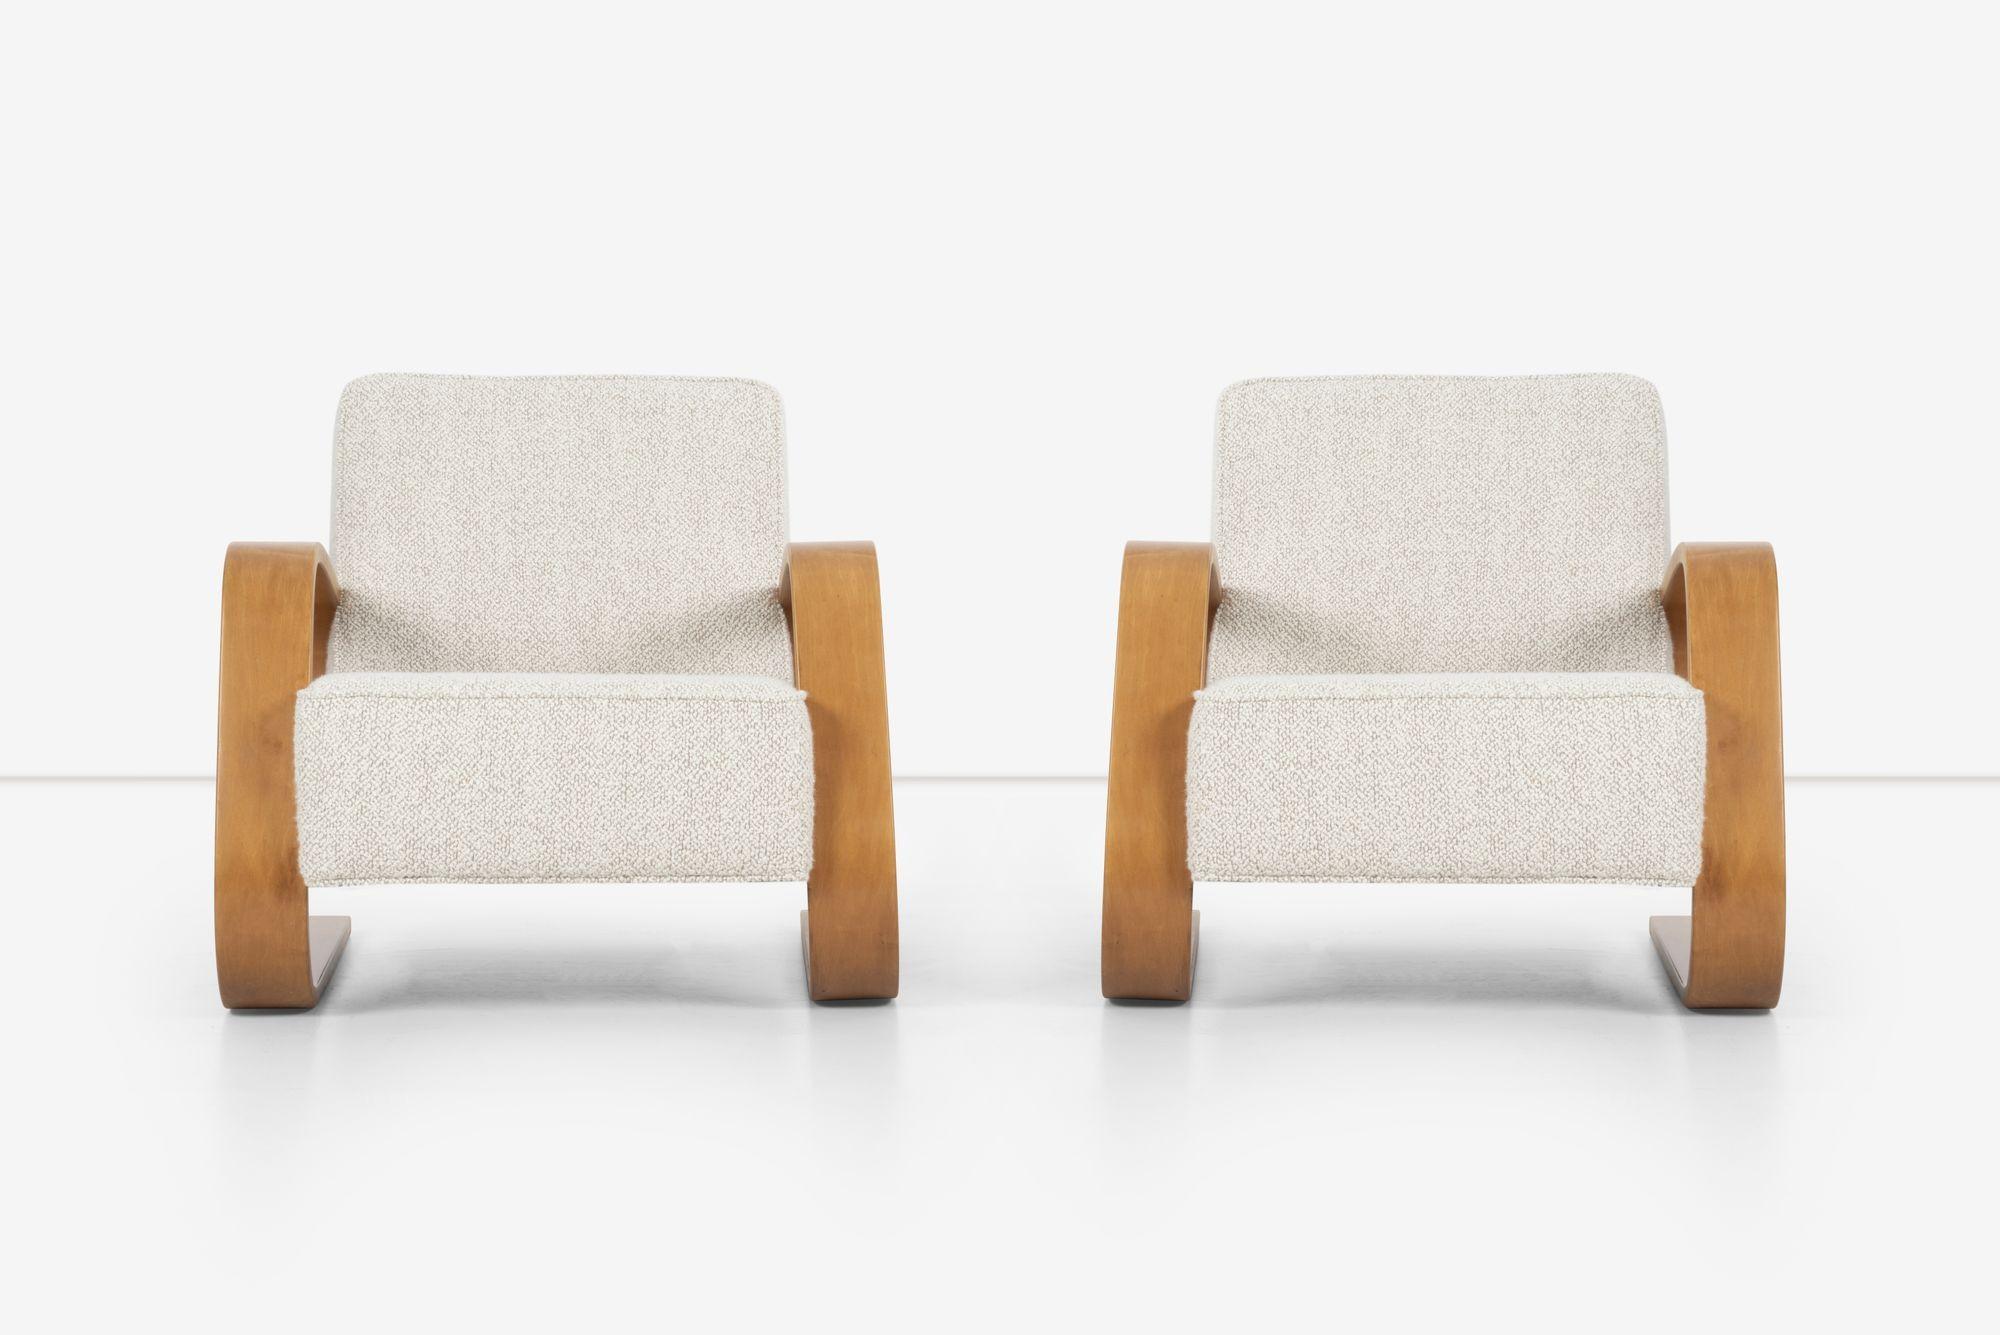 Pair of Early Alvar Aalto Tank chairs Model 400 by Artek Finland Circa 1940
Manufactured by O.y. Huonekalu-JA Rakennustyötehdas A.b., Turku, for Artek, Finland.
Laminated bent birch frames restored, and reupholstered with Great Plains heavy-nubby